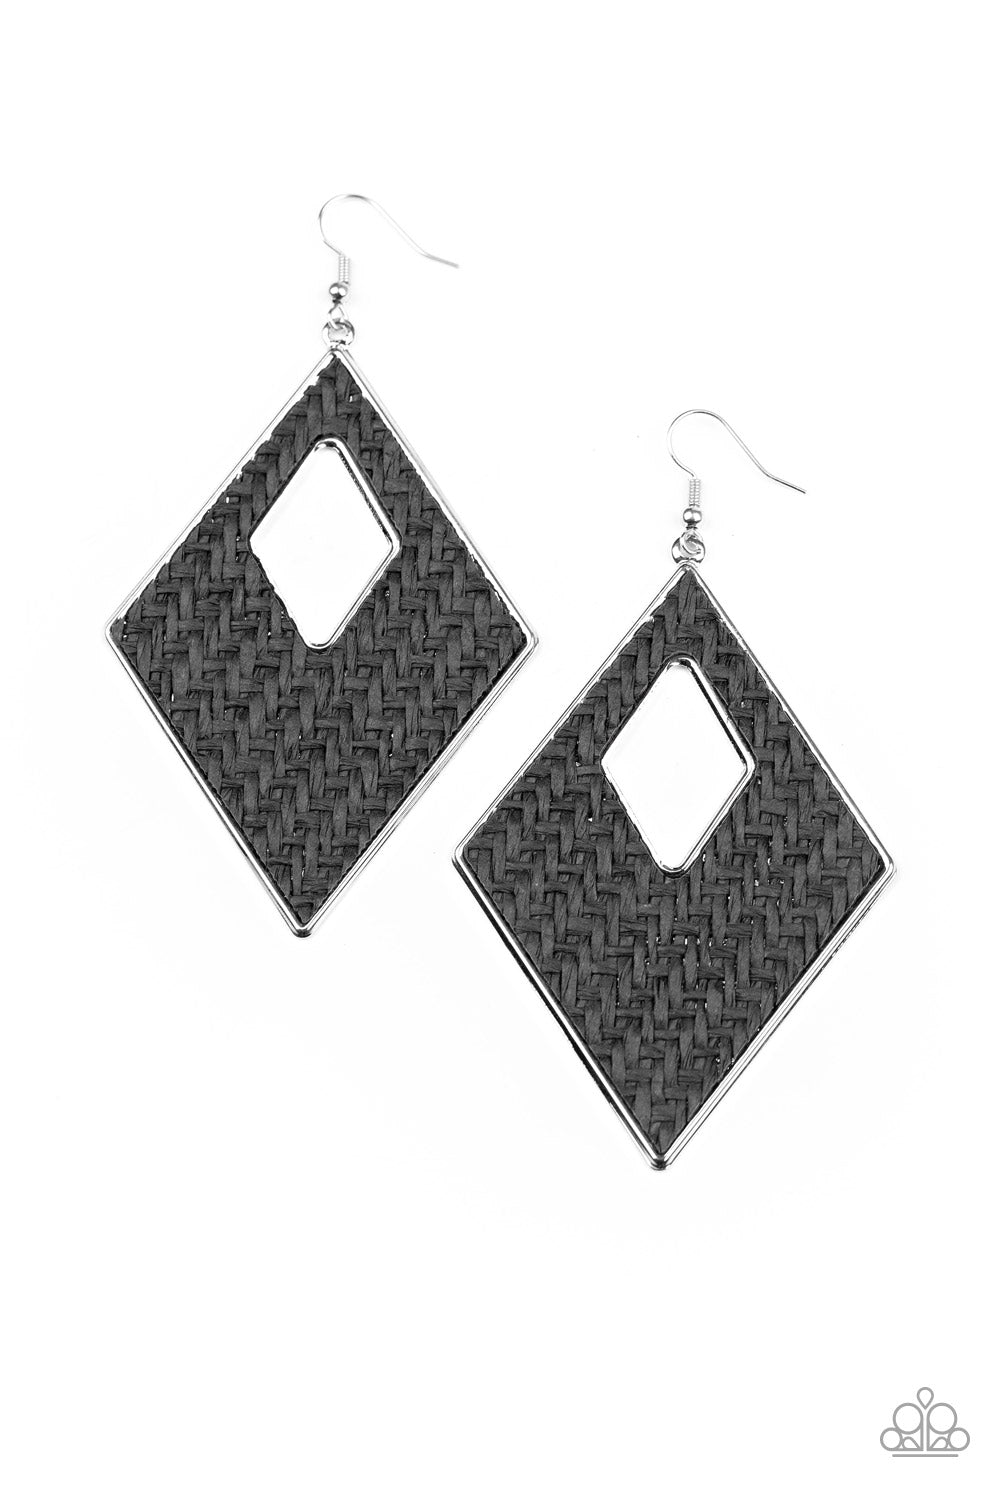 &lt;P&gt;Featuring a wicker-like pattern, black thread weaves across the front of a silver diamond-shape frame for a trendsetting look. Earring attaches to a standard fishhook fitting.
&lt;/P&gt;  

&lt;P&gt; &lt;I&gt;  Sold as one pair of earrings. &lt;/I&gt;  &lt;/P&gt;


&lt;img src=\&quot;https://d9b54x484lq62.cloudfront.net/paparazzi/shopping/images/517_tag150x115_1.png\&quot; alt=\&quot;New Kit\&quot; align=\&quot;middle\&quot; height=\&quot;50\&quot; width=\&quot;50\&quot;/&gt;